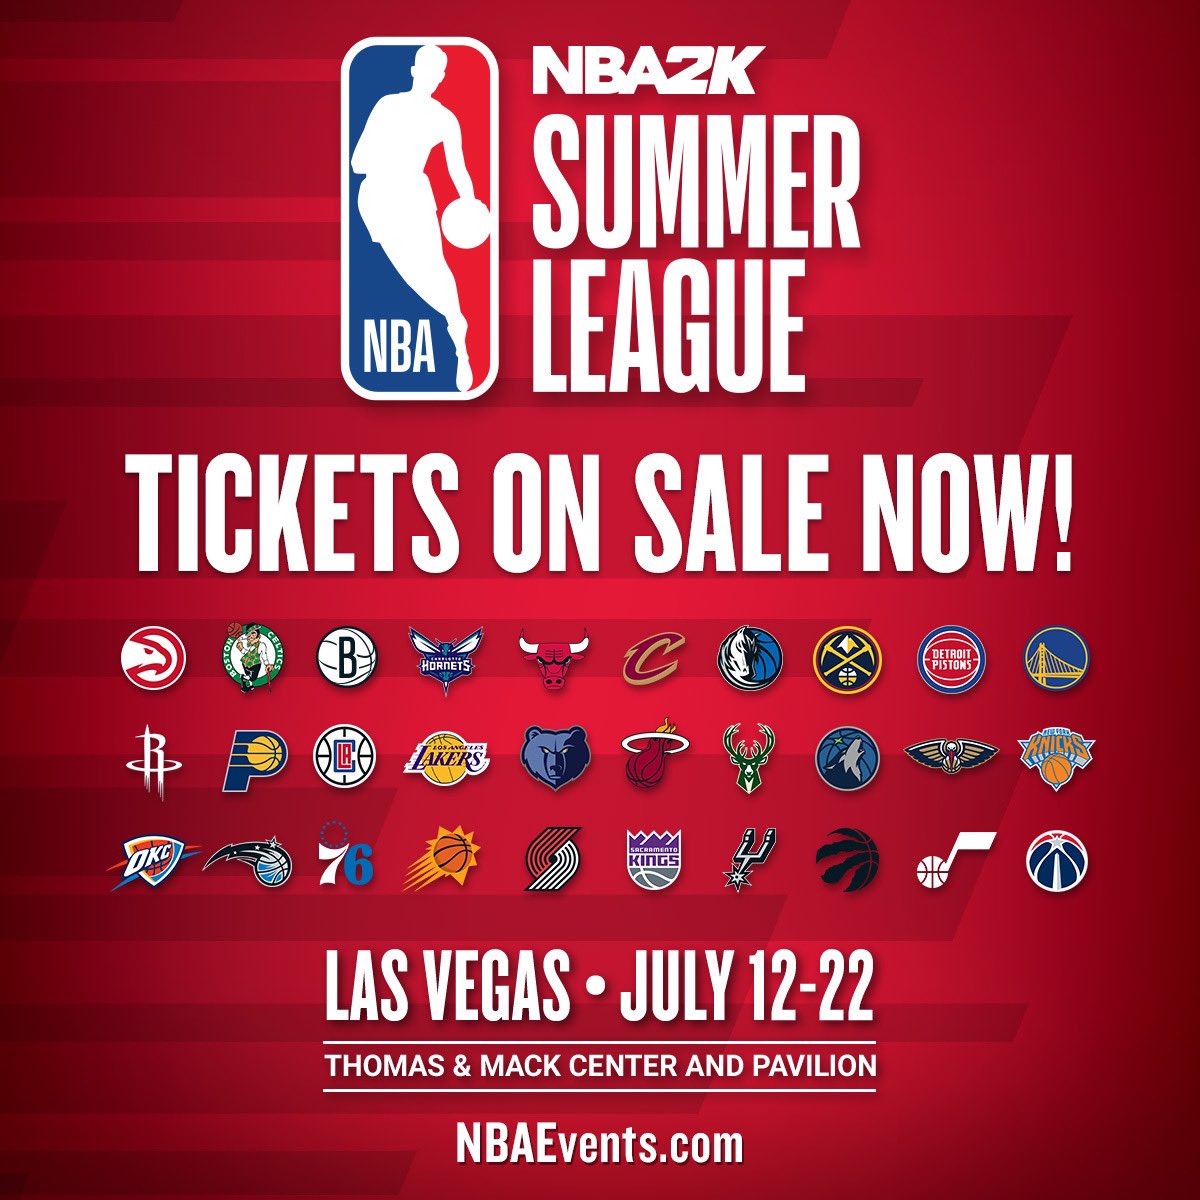 11 Days. 76 Games. All 30 NBA Teams. Tickets are NOW ON SALE for the NBA 2K Summer League taking place July 12-22 in Las Vegas. Find out more here: NBAEvents.com #NBA2KSummerLeague